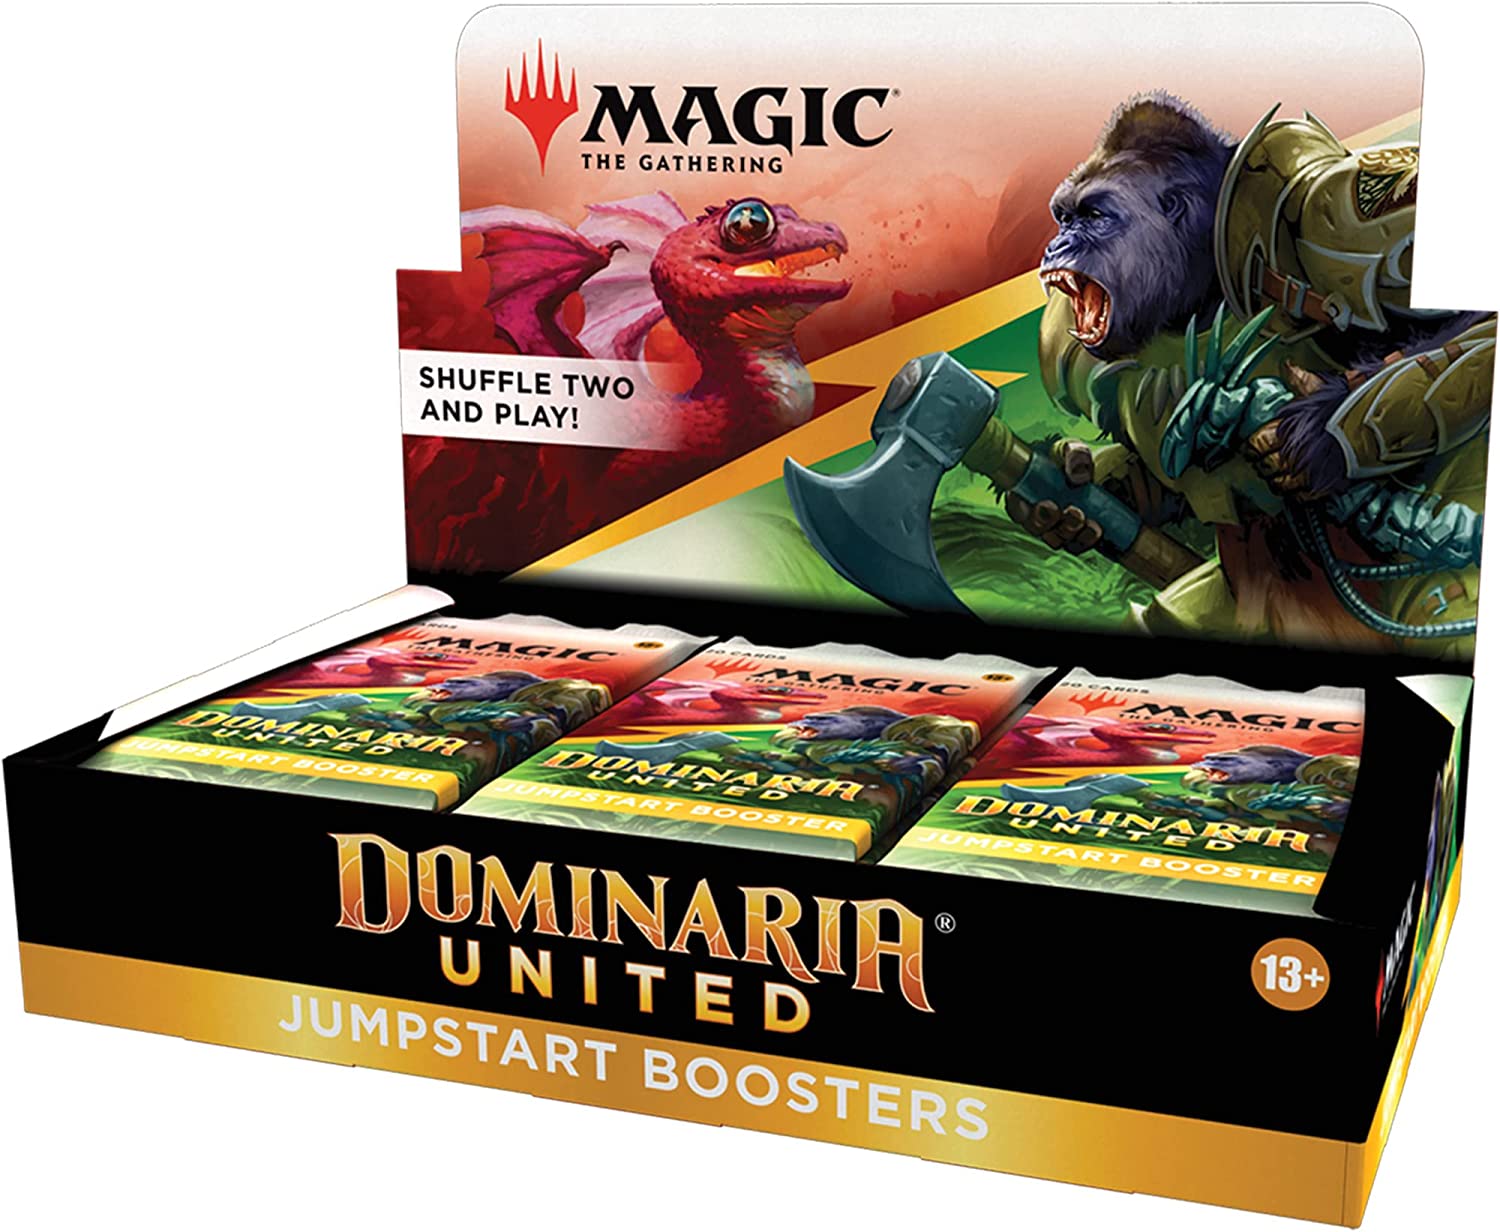 Magic: The Gathering Dominaria United Jumpstart Booster Box | CCGPrime